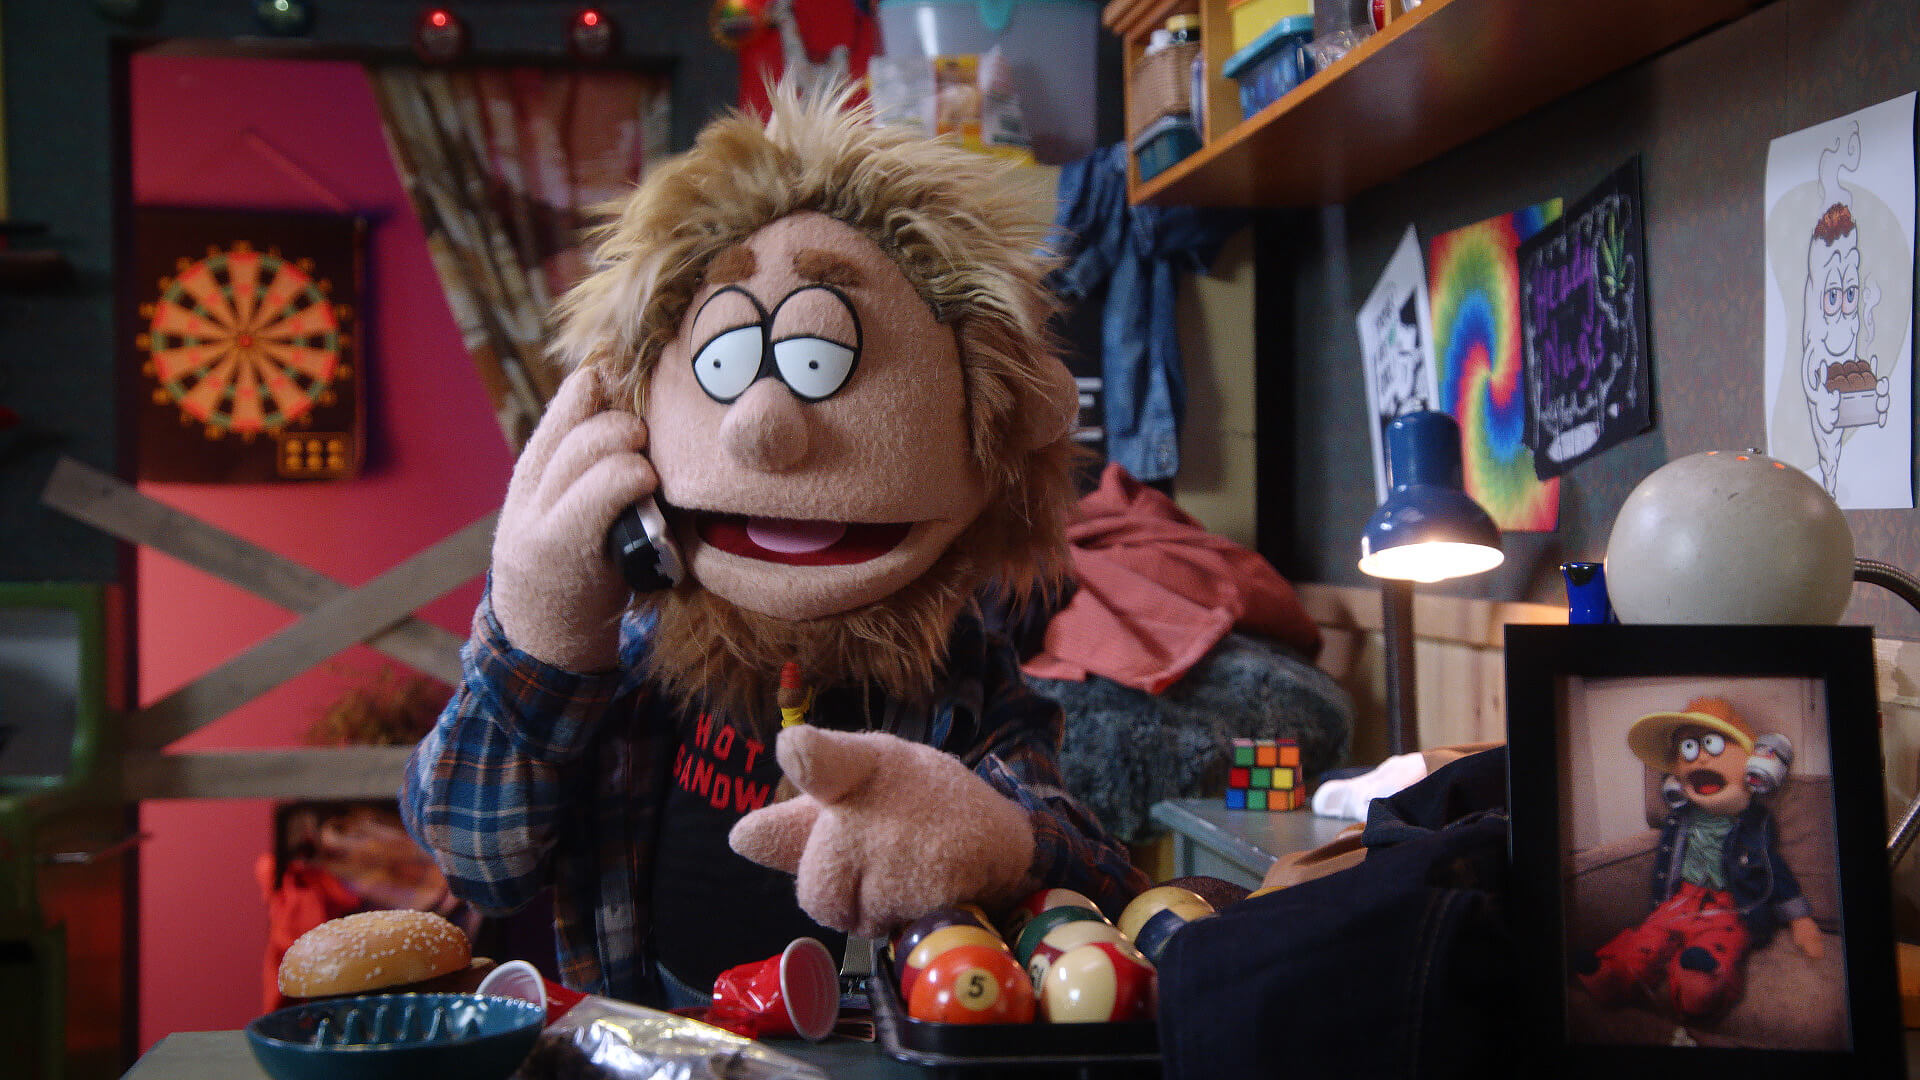 Bobby Fletcher (Jim Florentine) prank calls a debt collector in a sketch directed by Todd Bishop for Crank Yankers